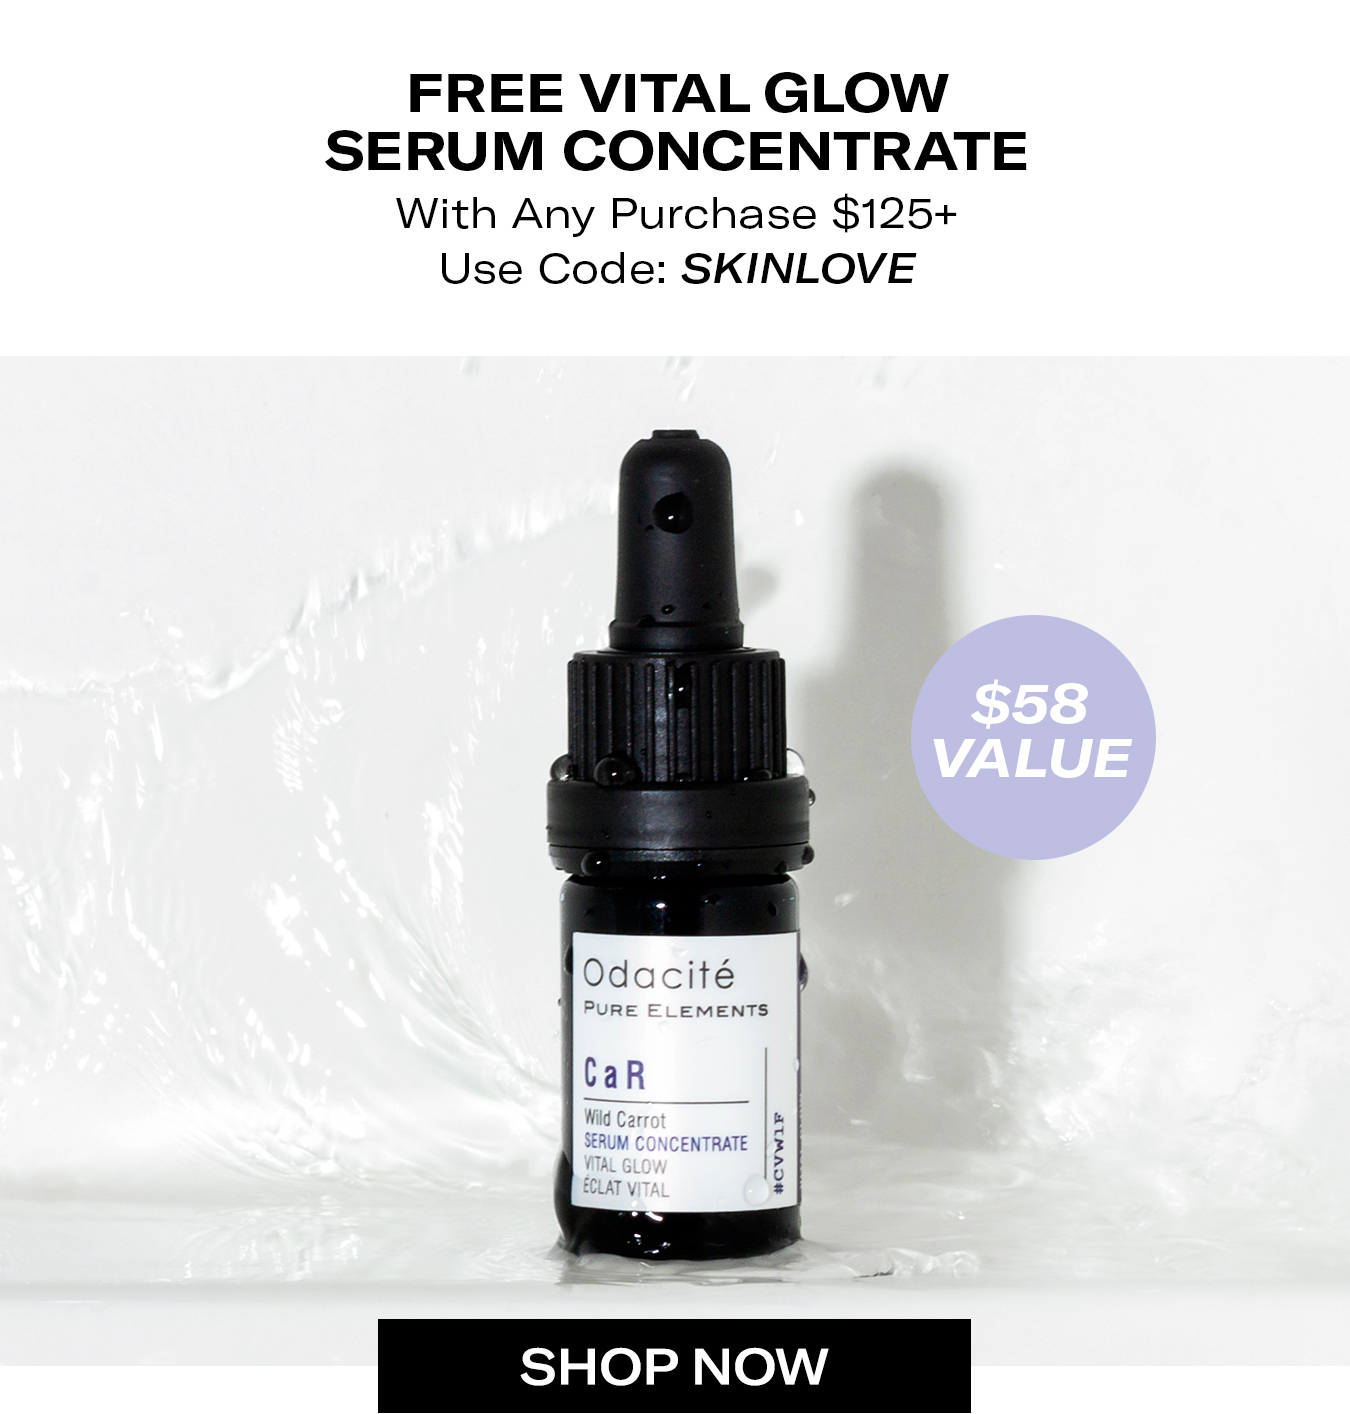 Free Vital Glow Serum Concentrate With Any Purchase $125+